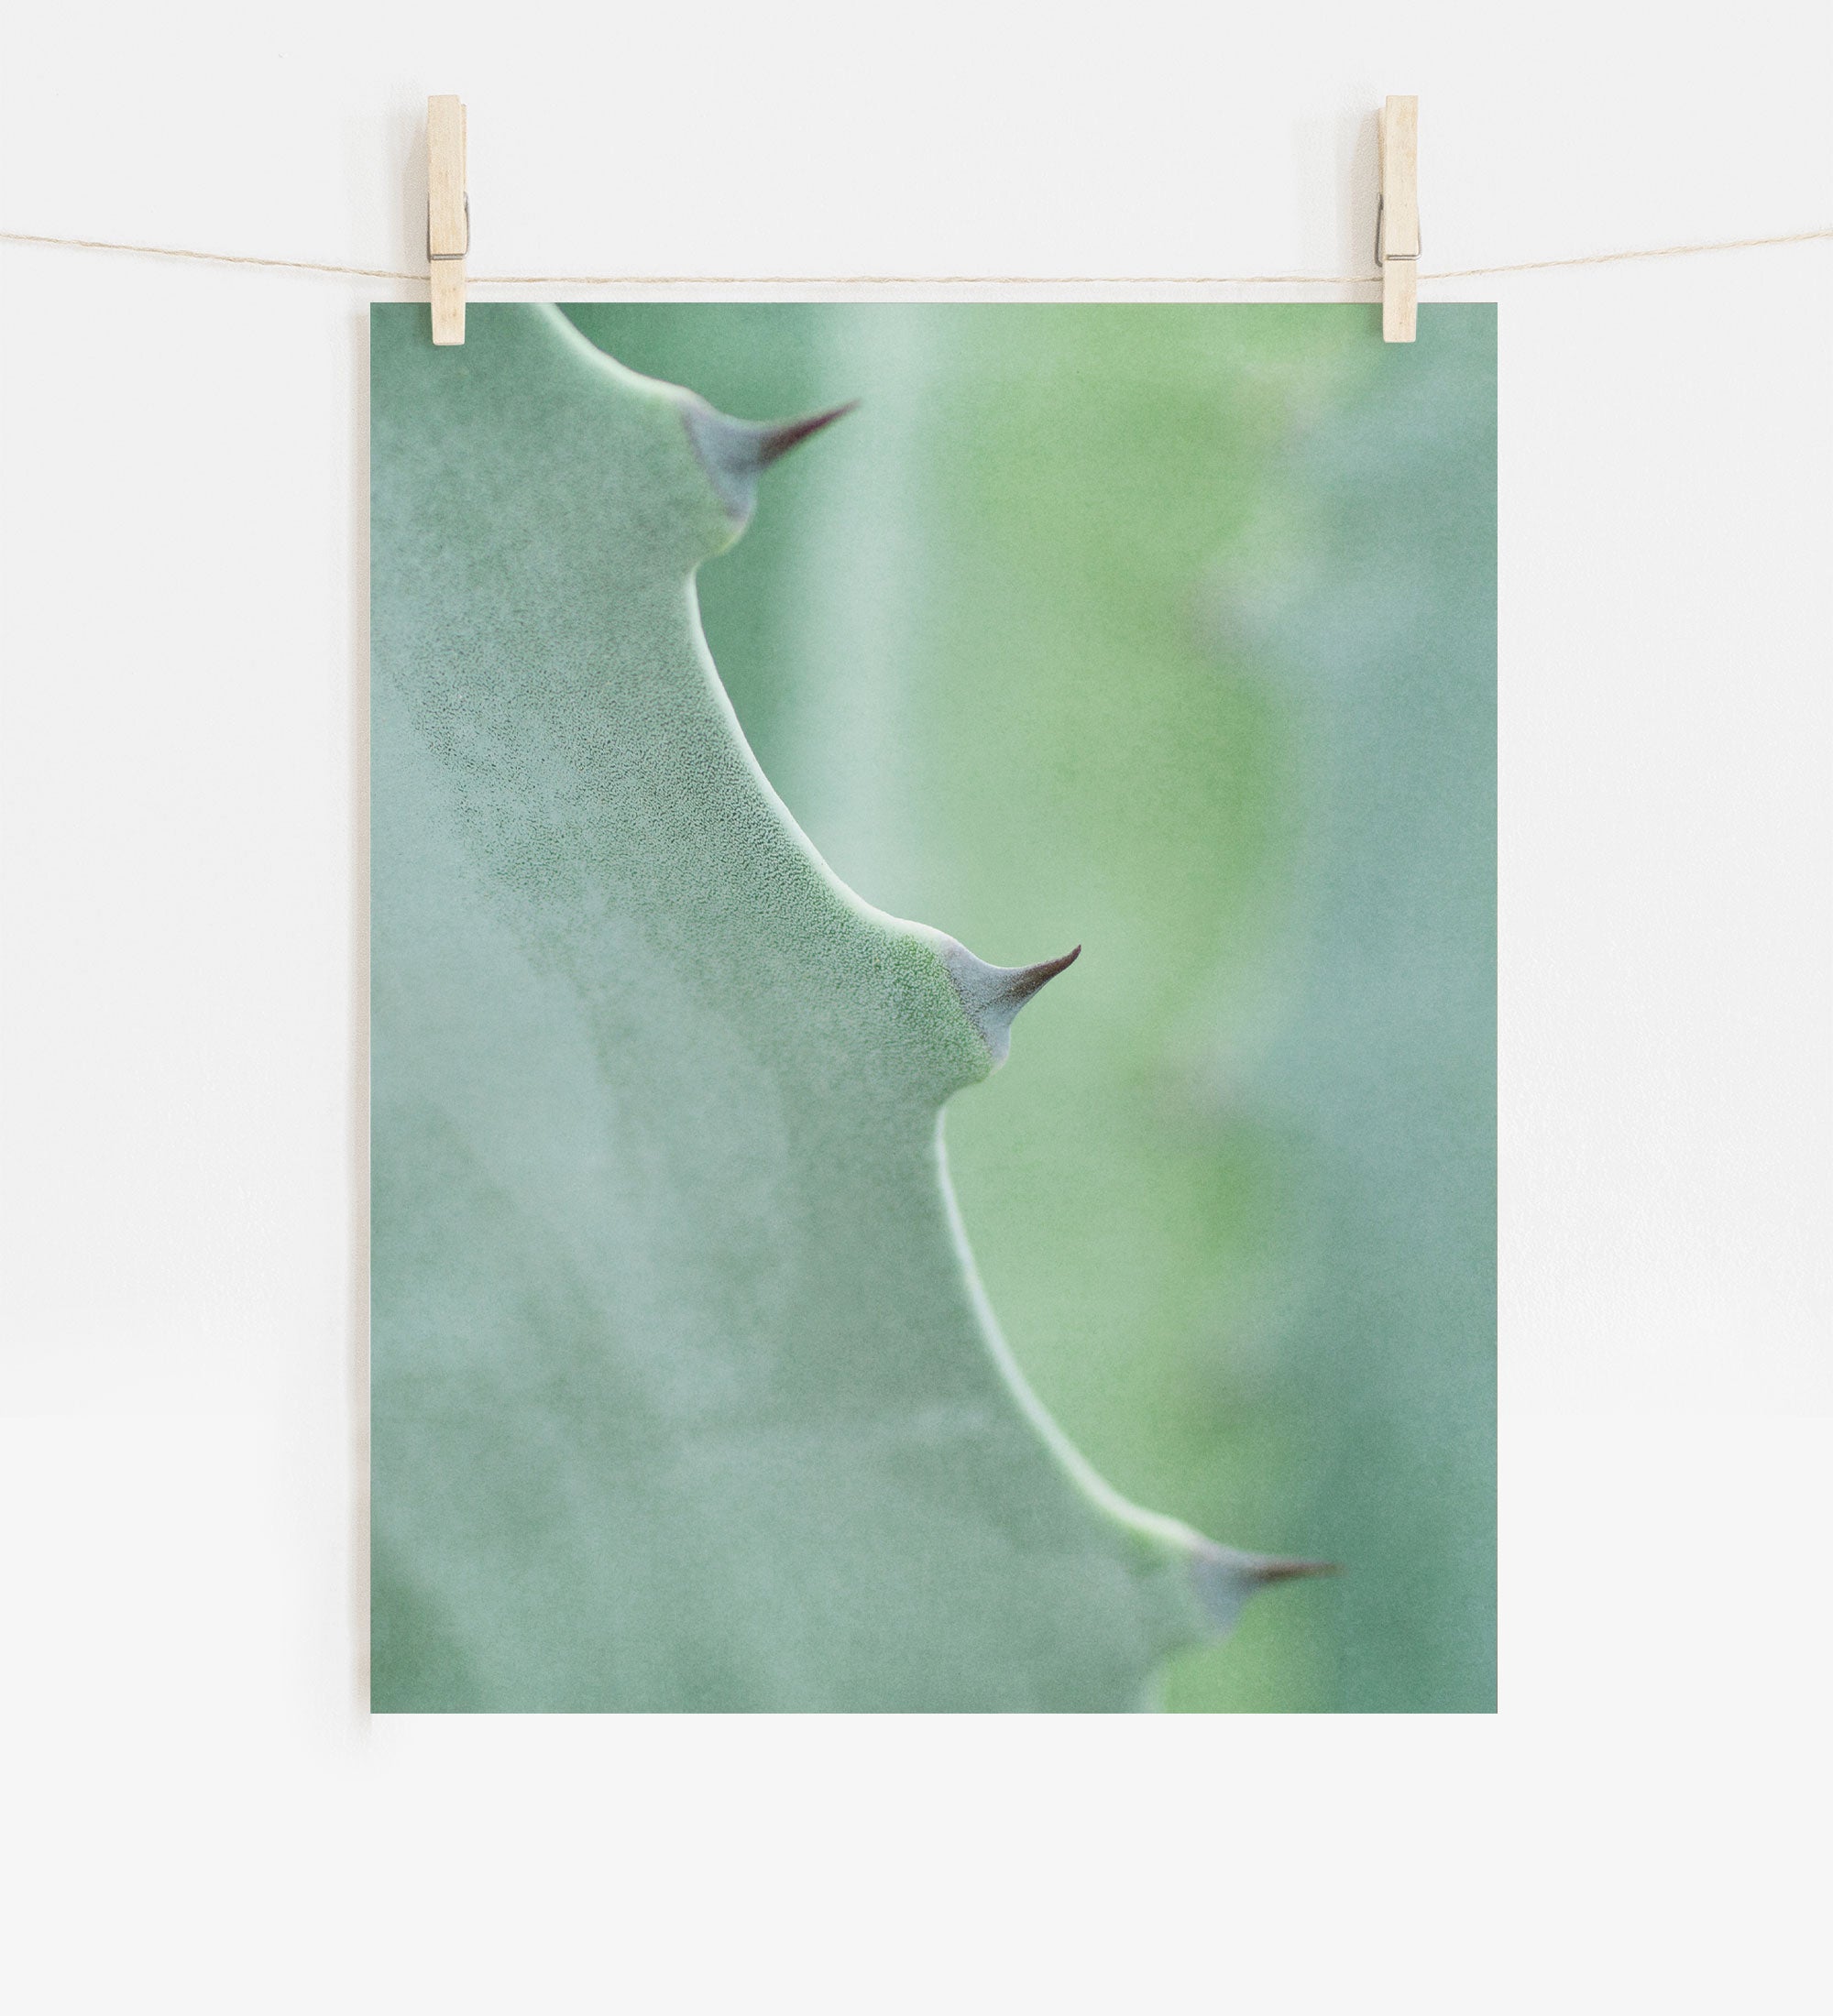 A close-up photo of a green Offley Green Botanical Print, 'Aloe Vera Spikes II' leaf with sharp thorns, hung by clothespins on a string against a blurred background.